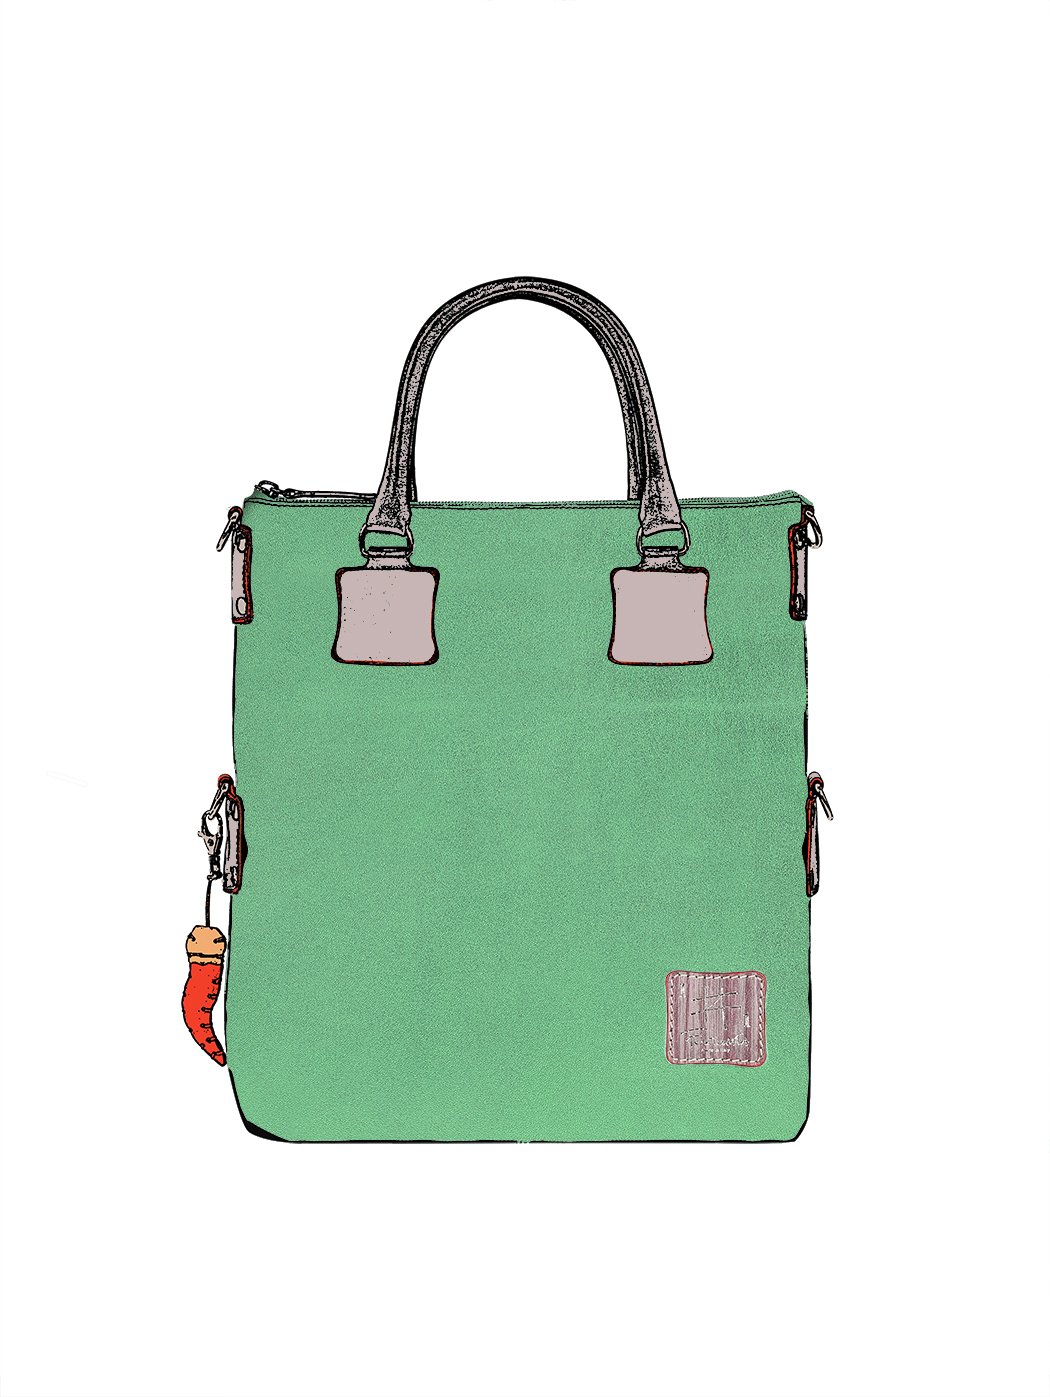 Large Tote Bag Leather Green - Handmade in Italy